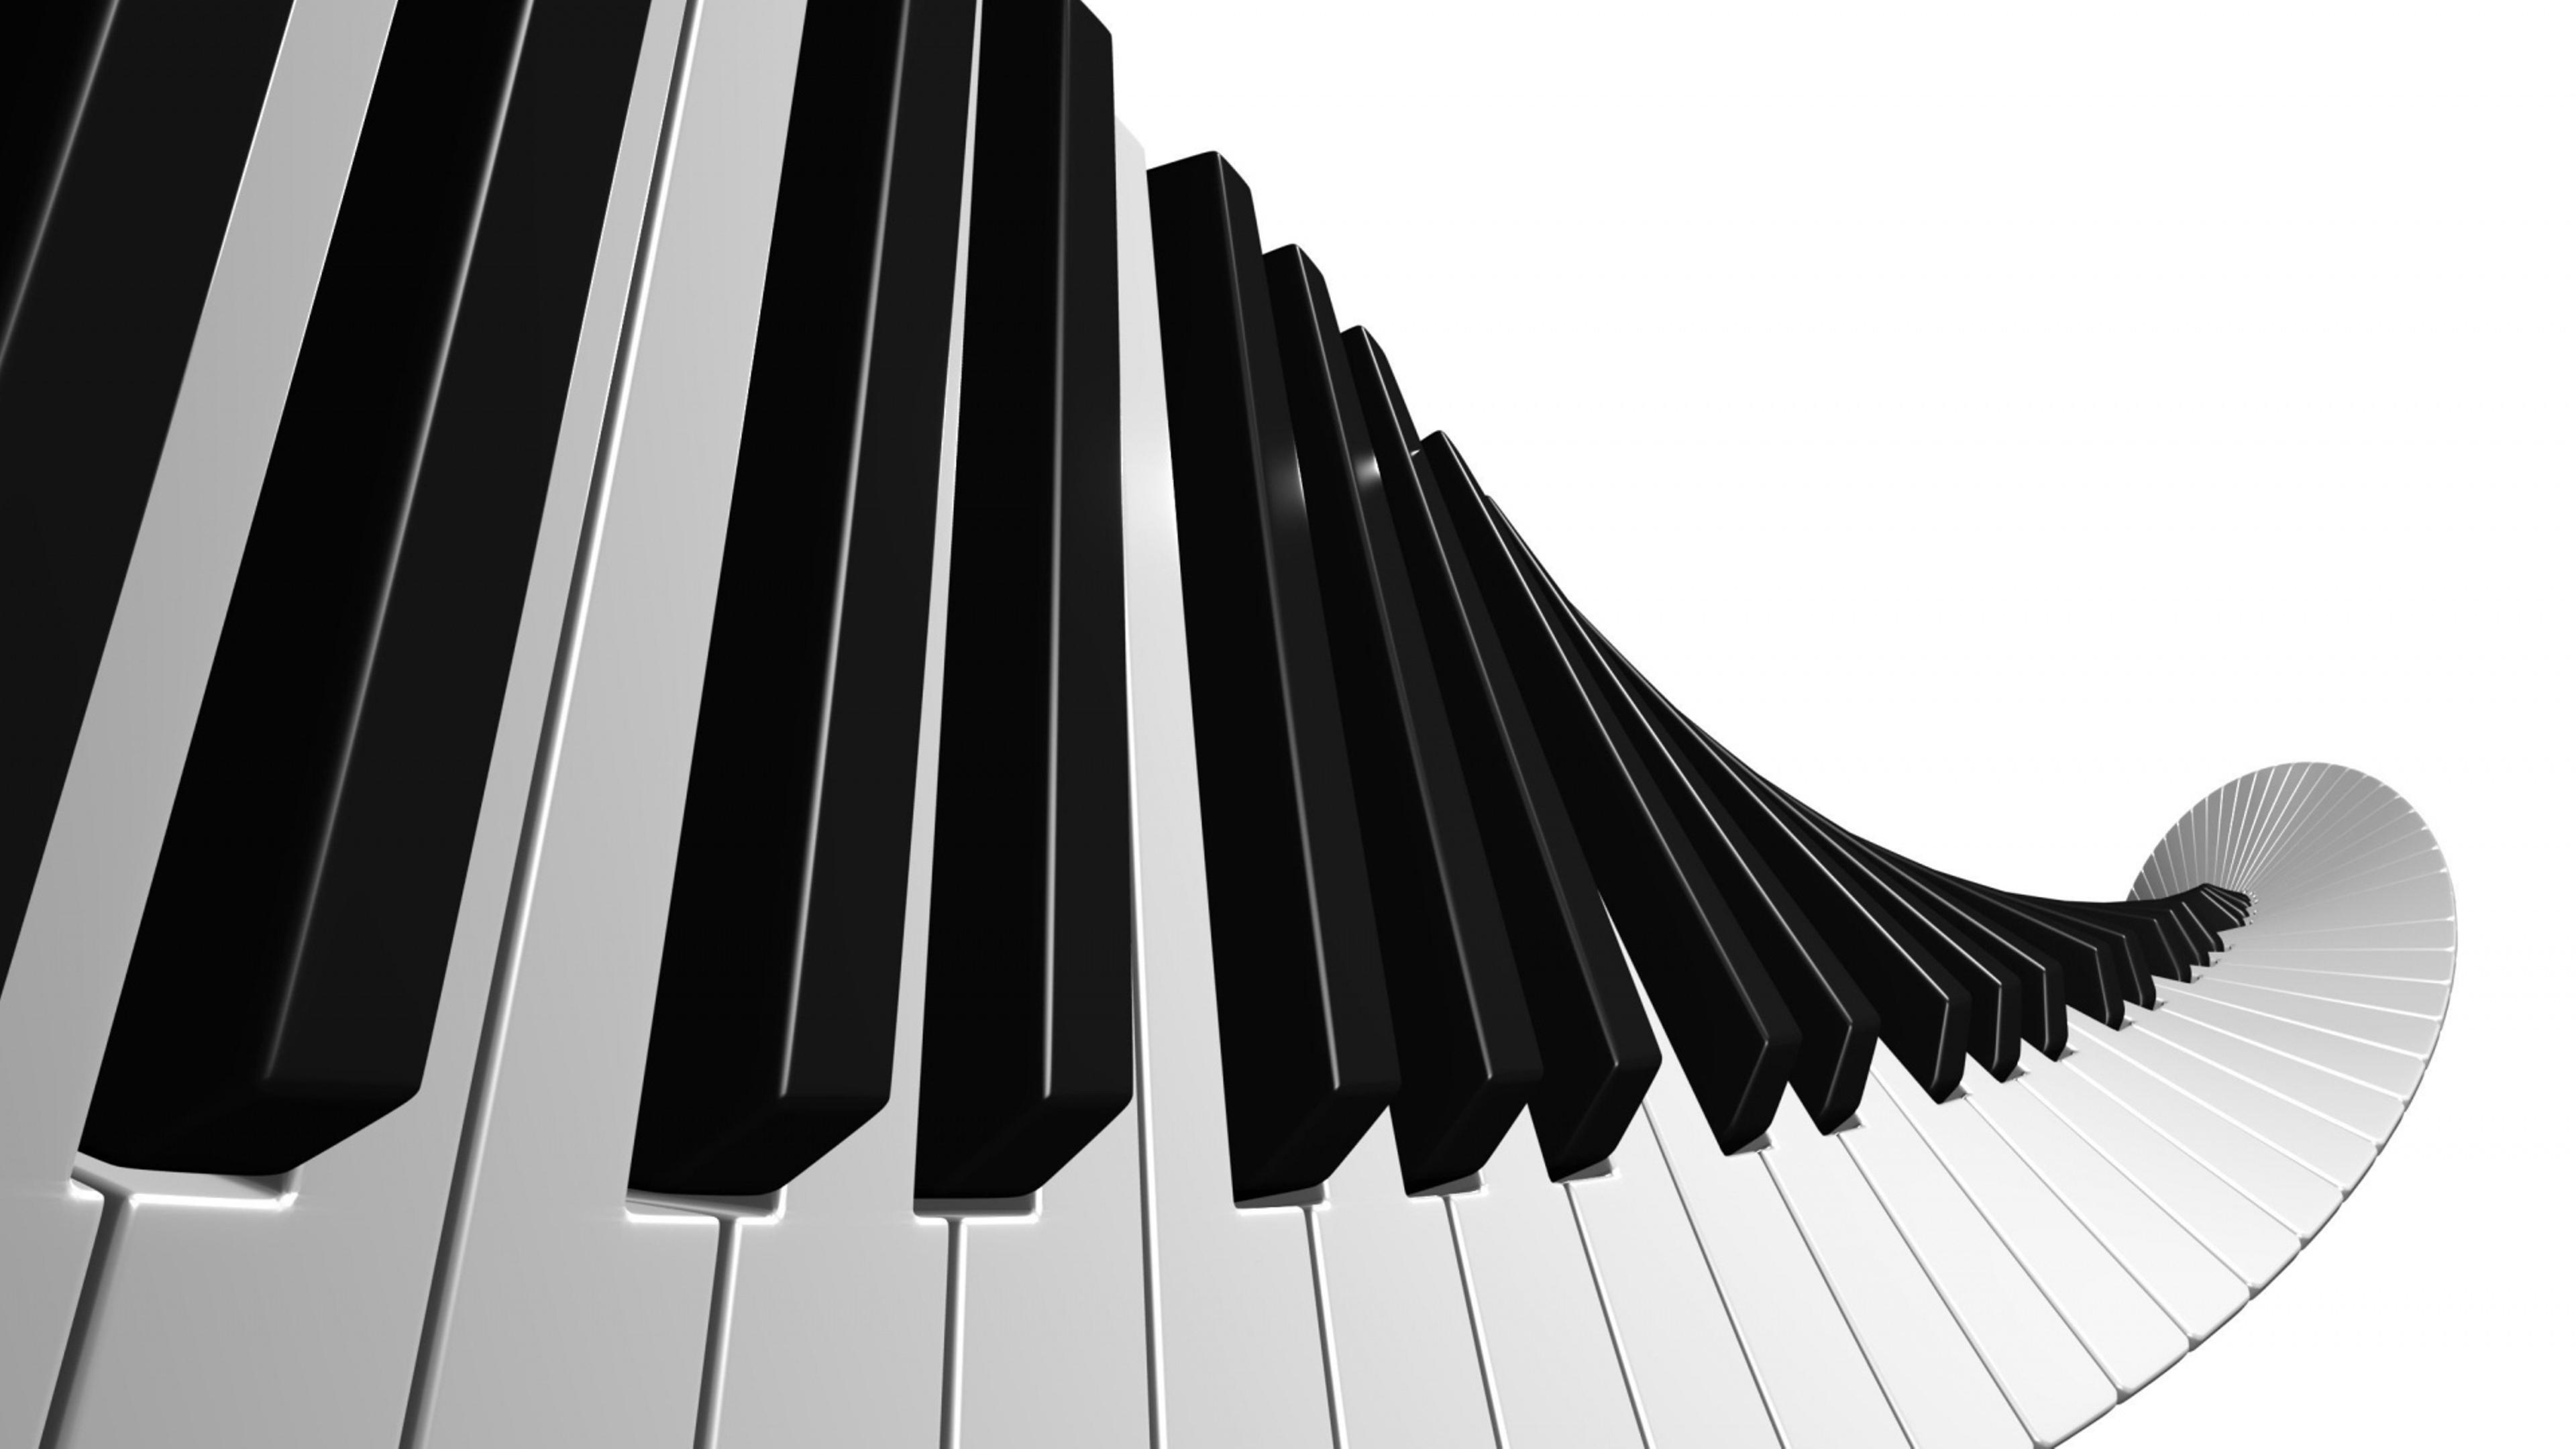 Abstract Piano Wallpapers